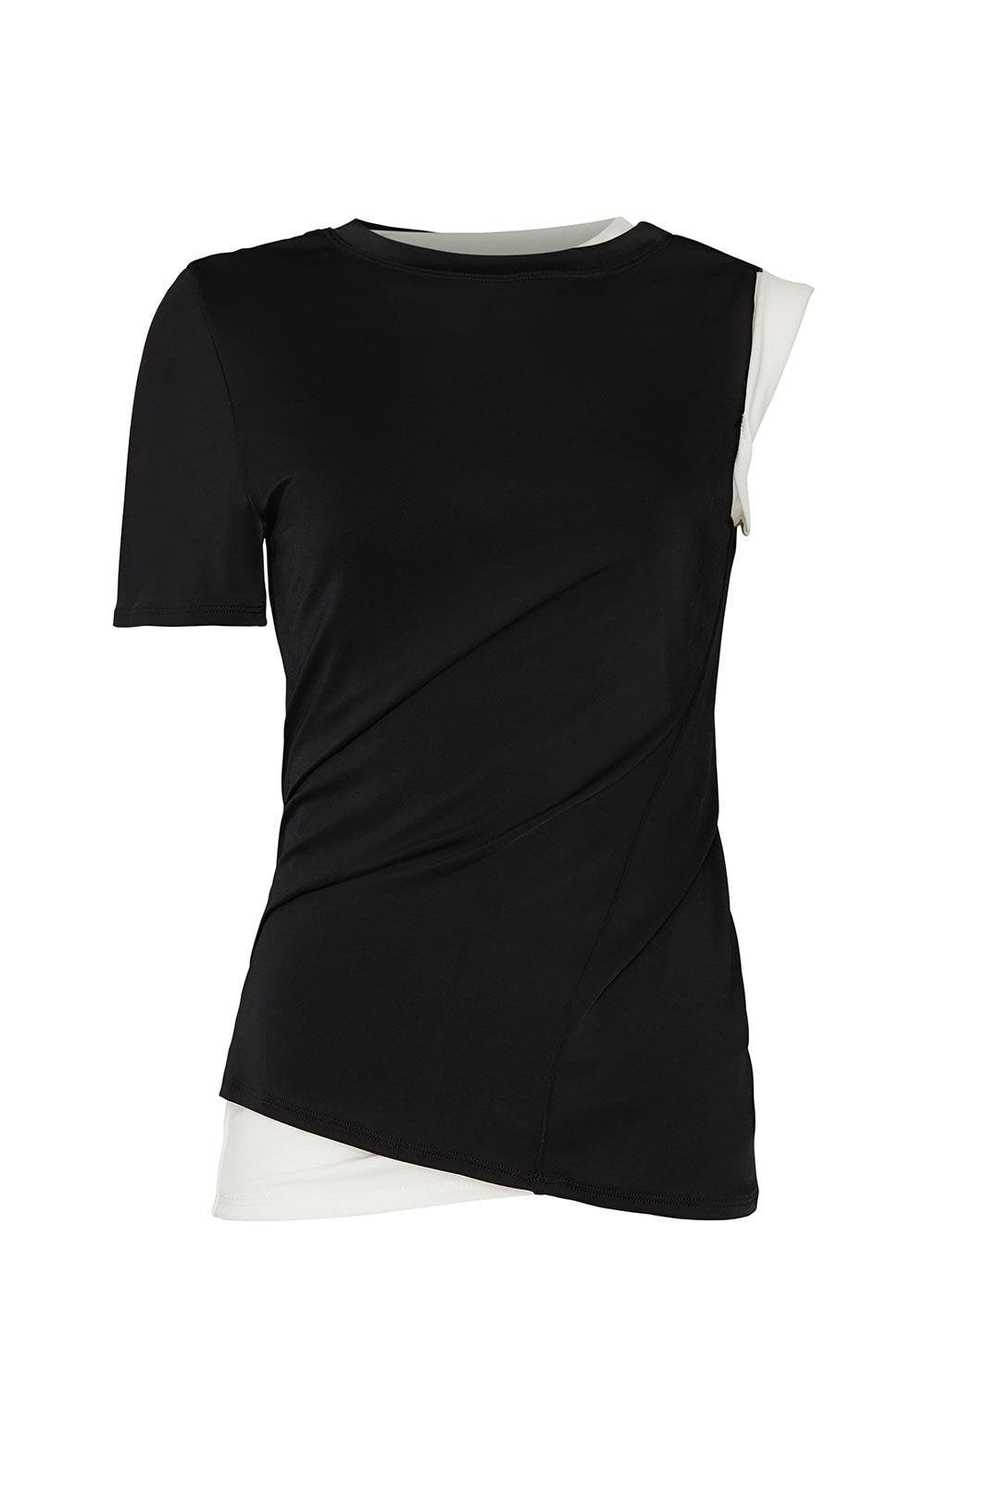 Monse Double Layer Twisted Top - image 5